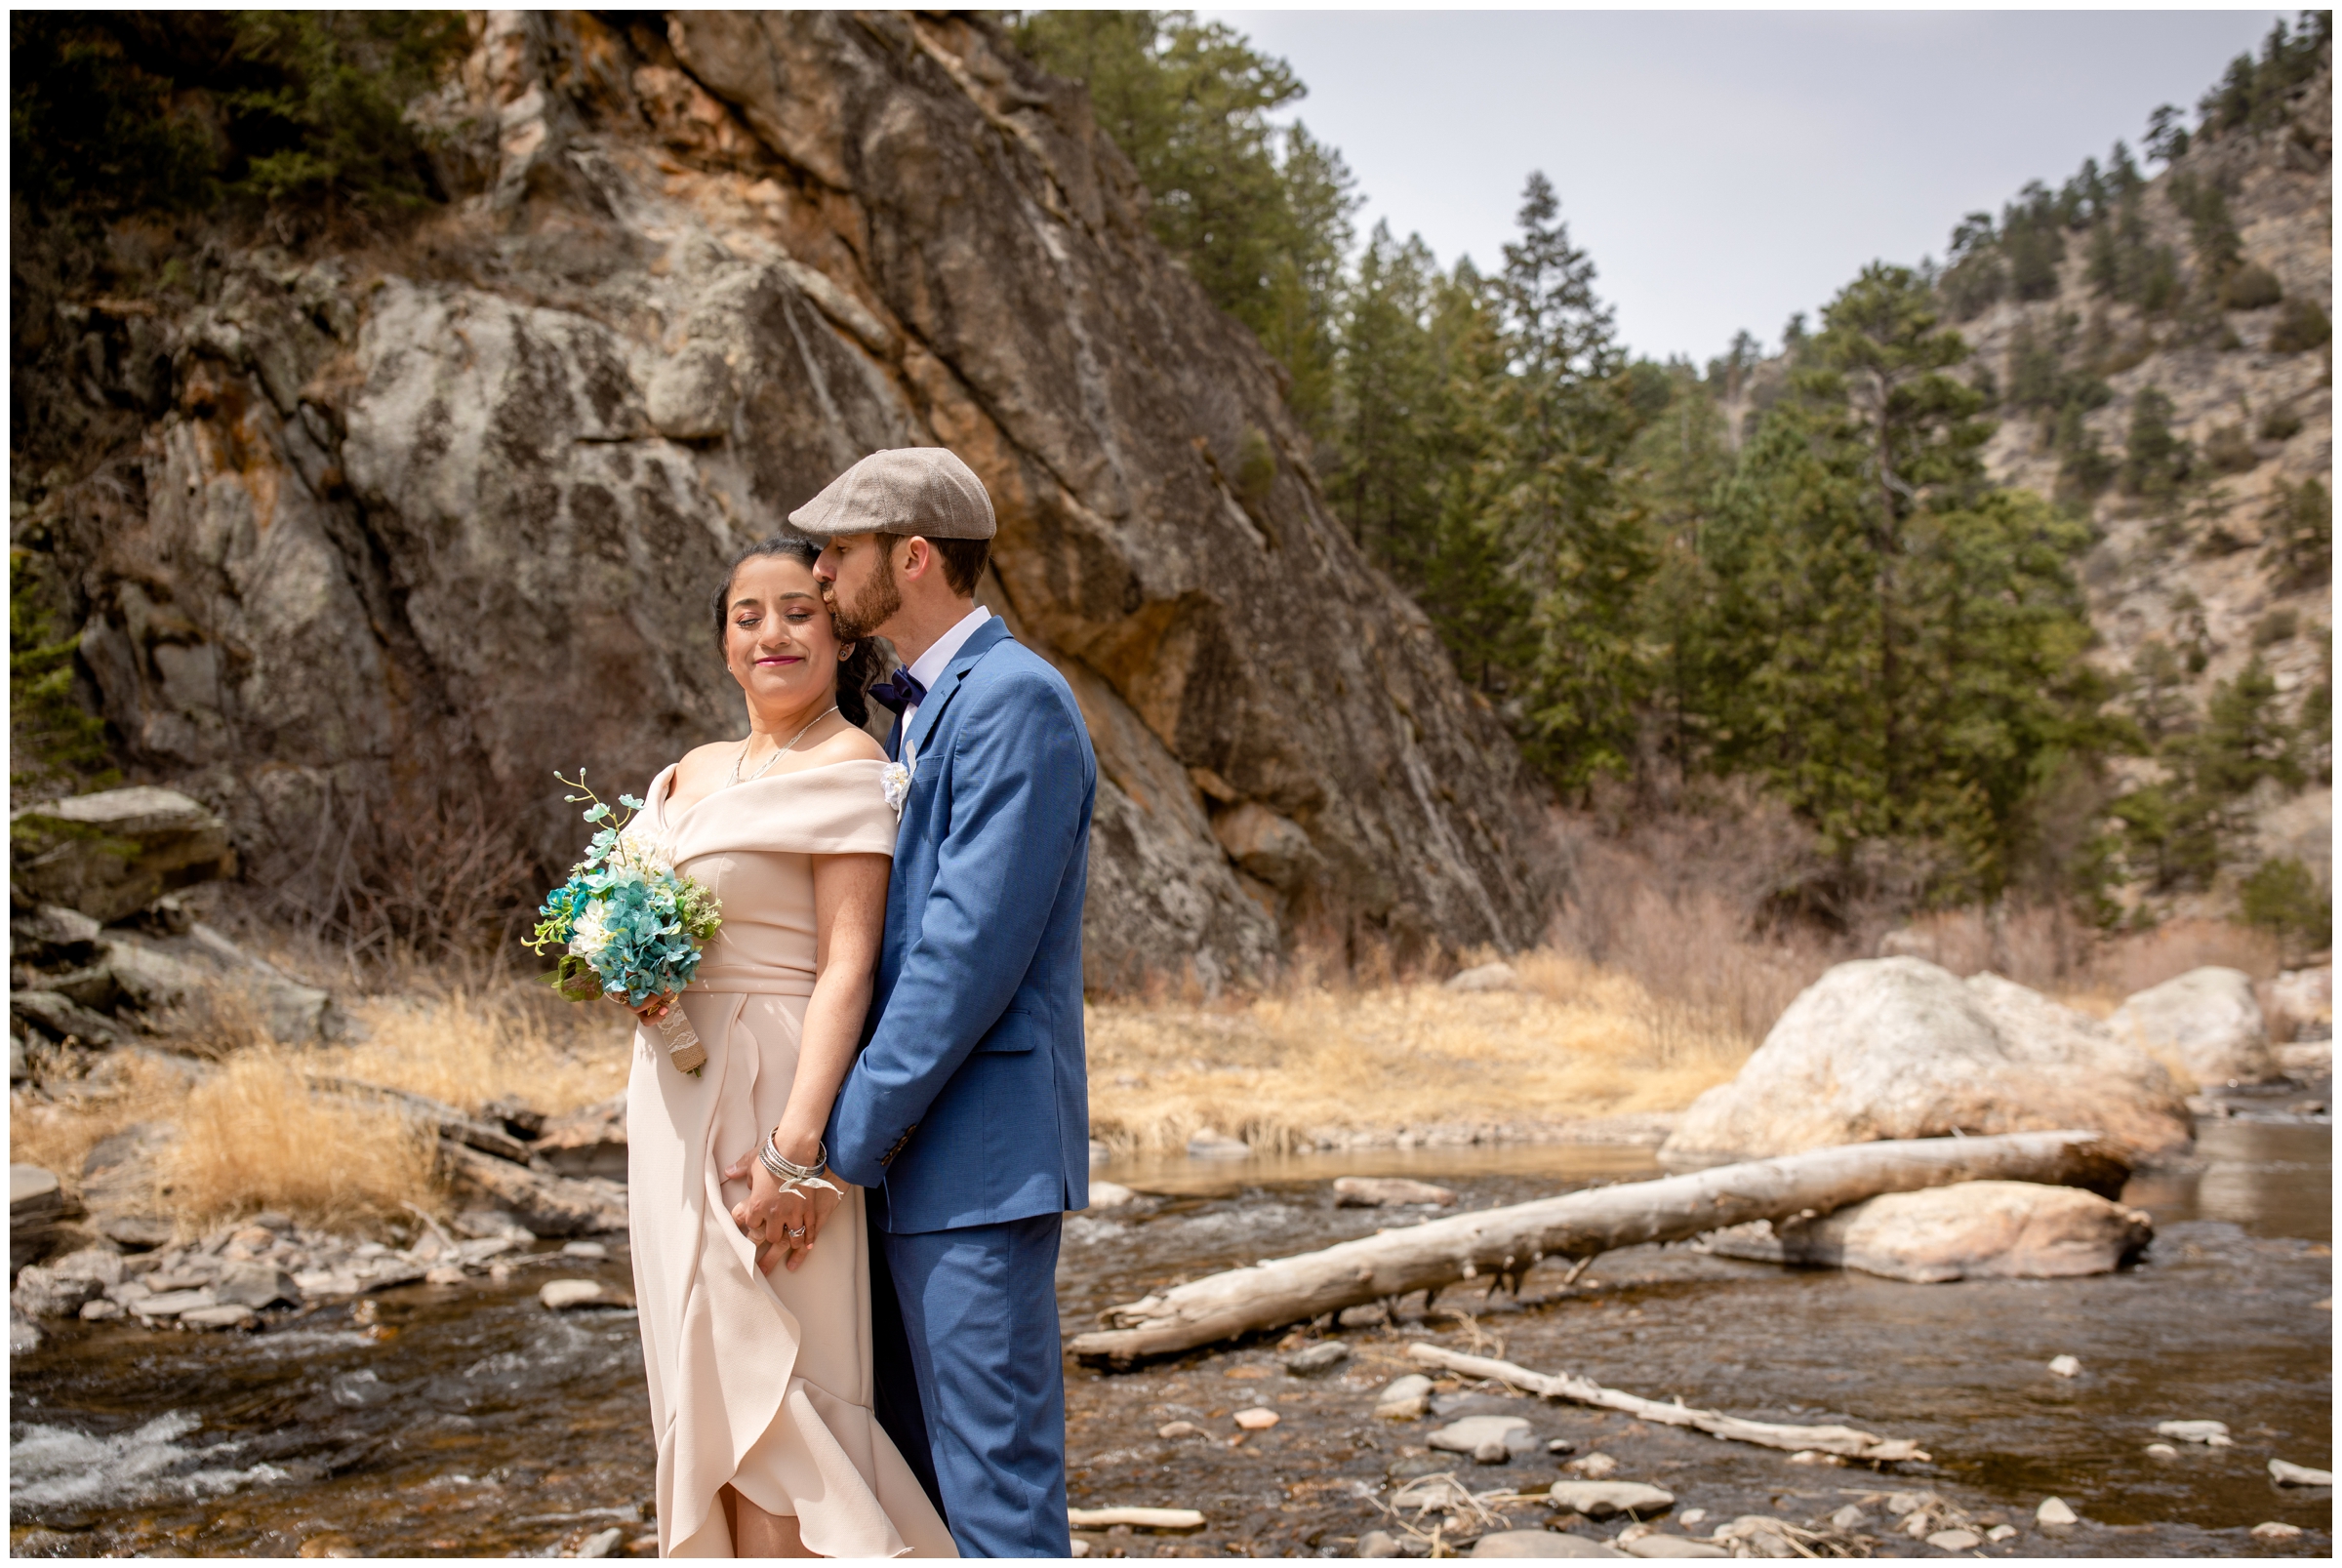 Loveland Colorado wedding photos by the river in Big Thompson Canyon during spring by elopement photographer Plum Pretty Photography